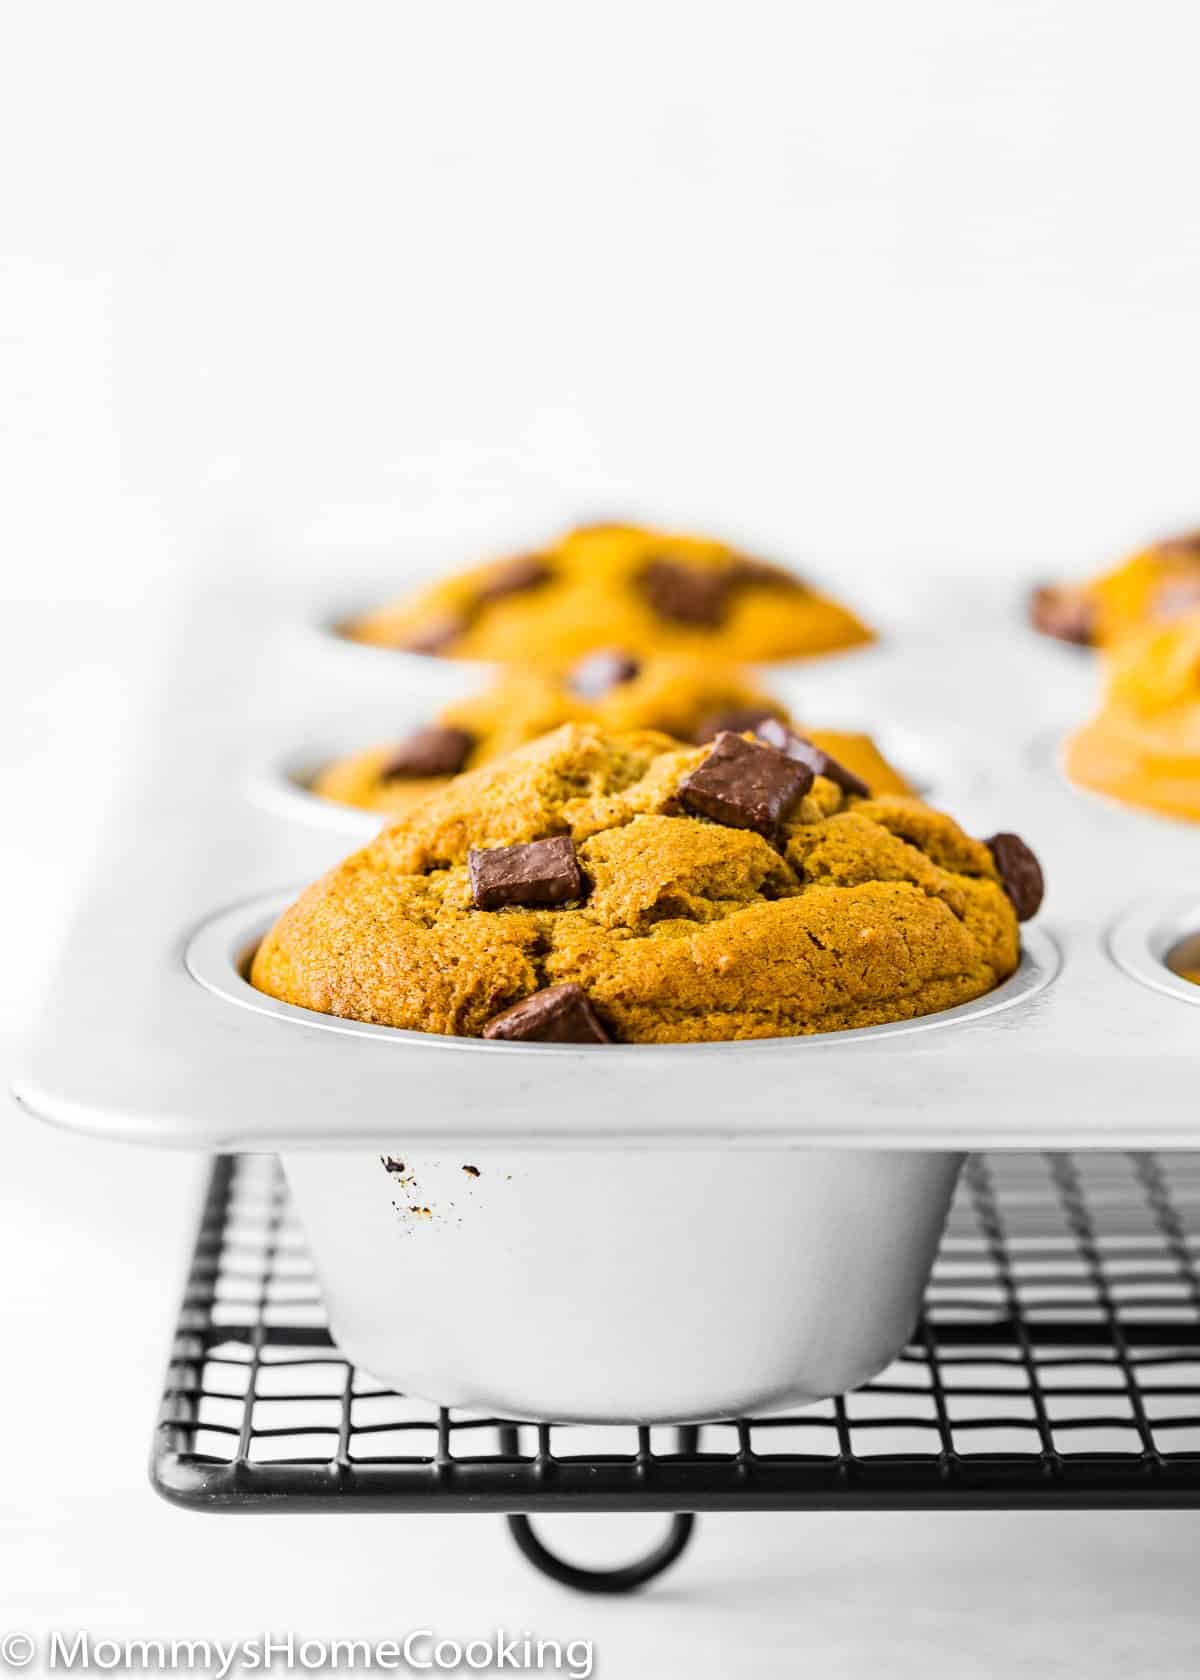 bakes Eggless Chocolate Chip Pumpkin Muffin in a muffin pan over a cooling rack